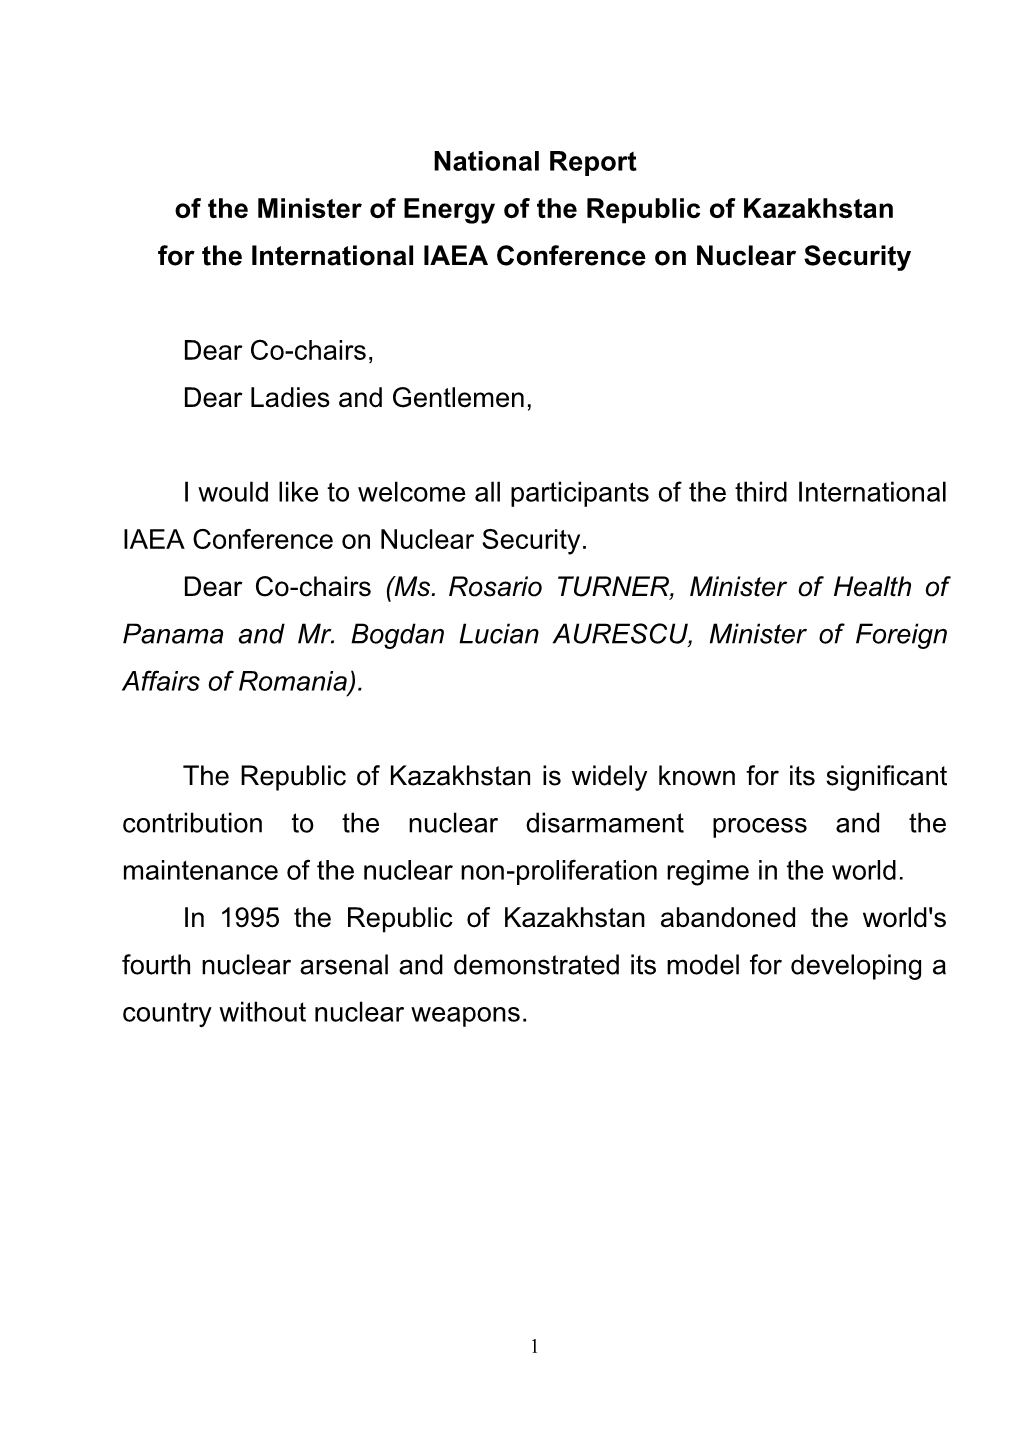 National Report of the Minister of Energy of the Republic of Kazakhstan for the International IAEA Conference on Nuclear Security